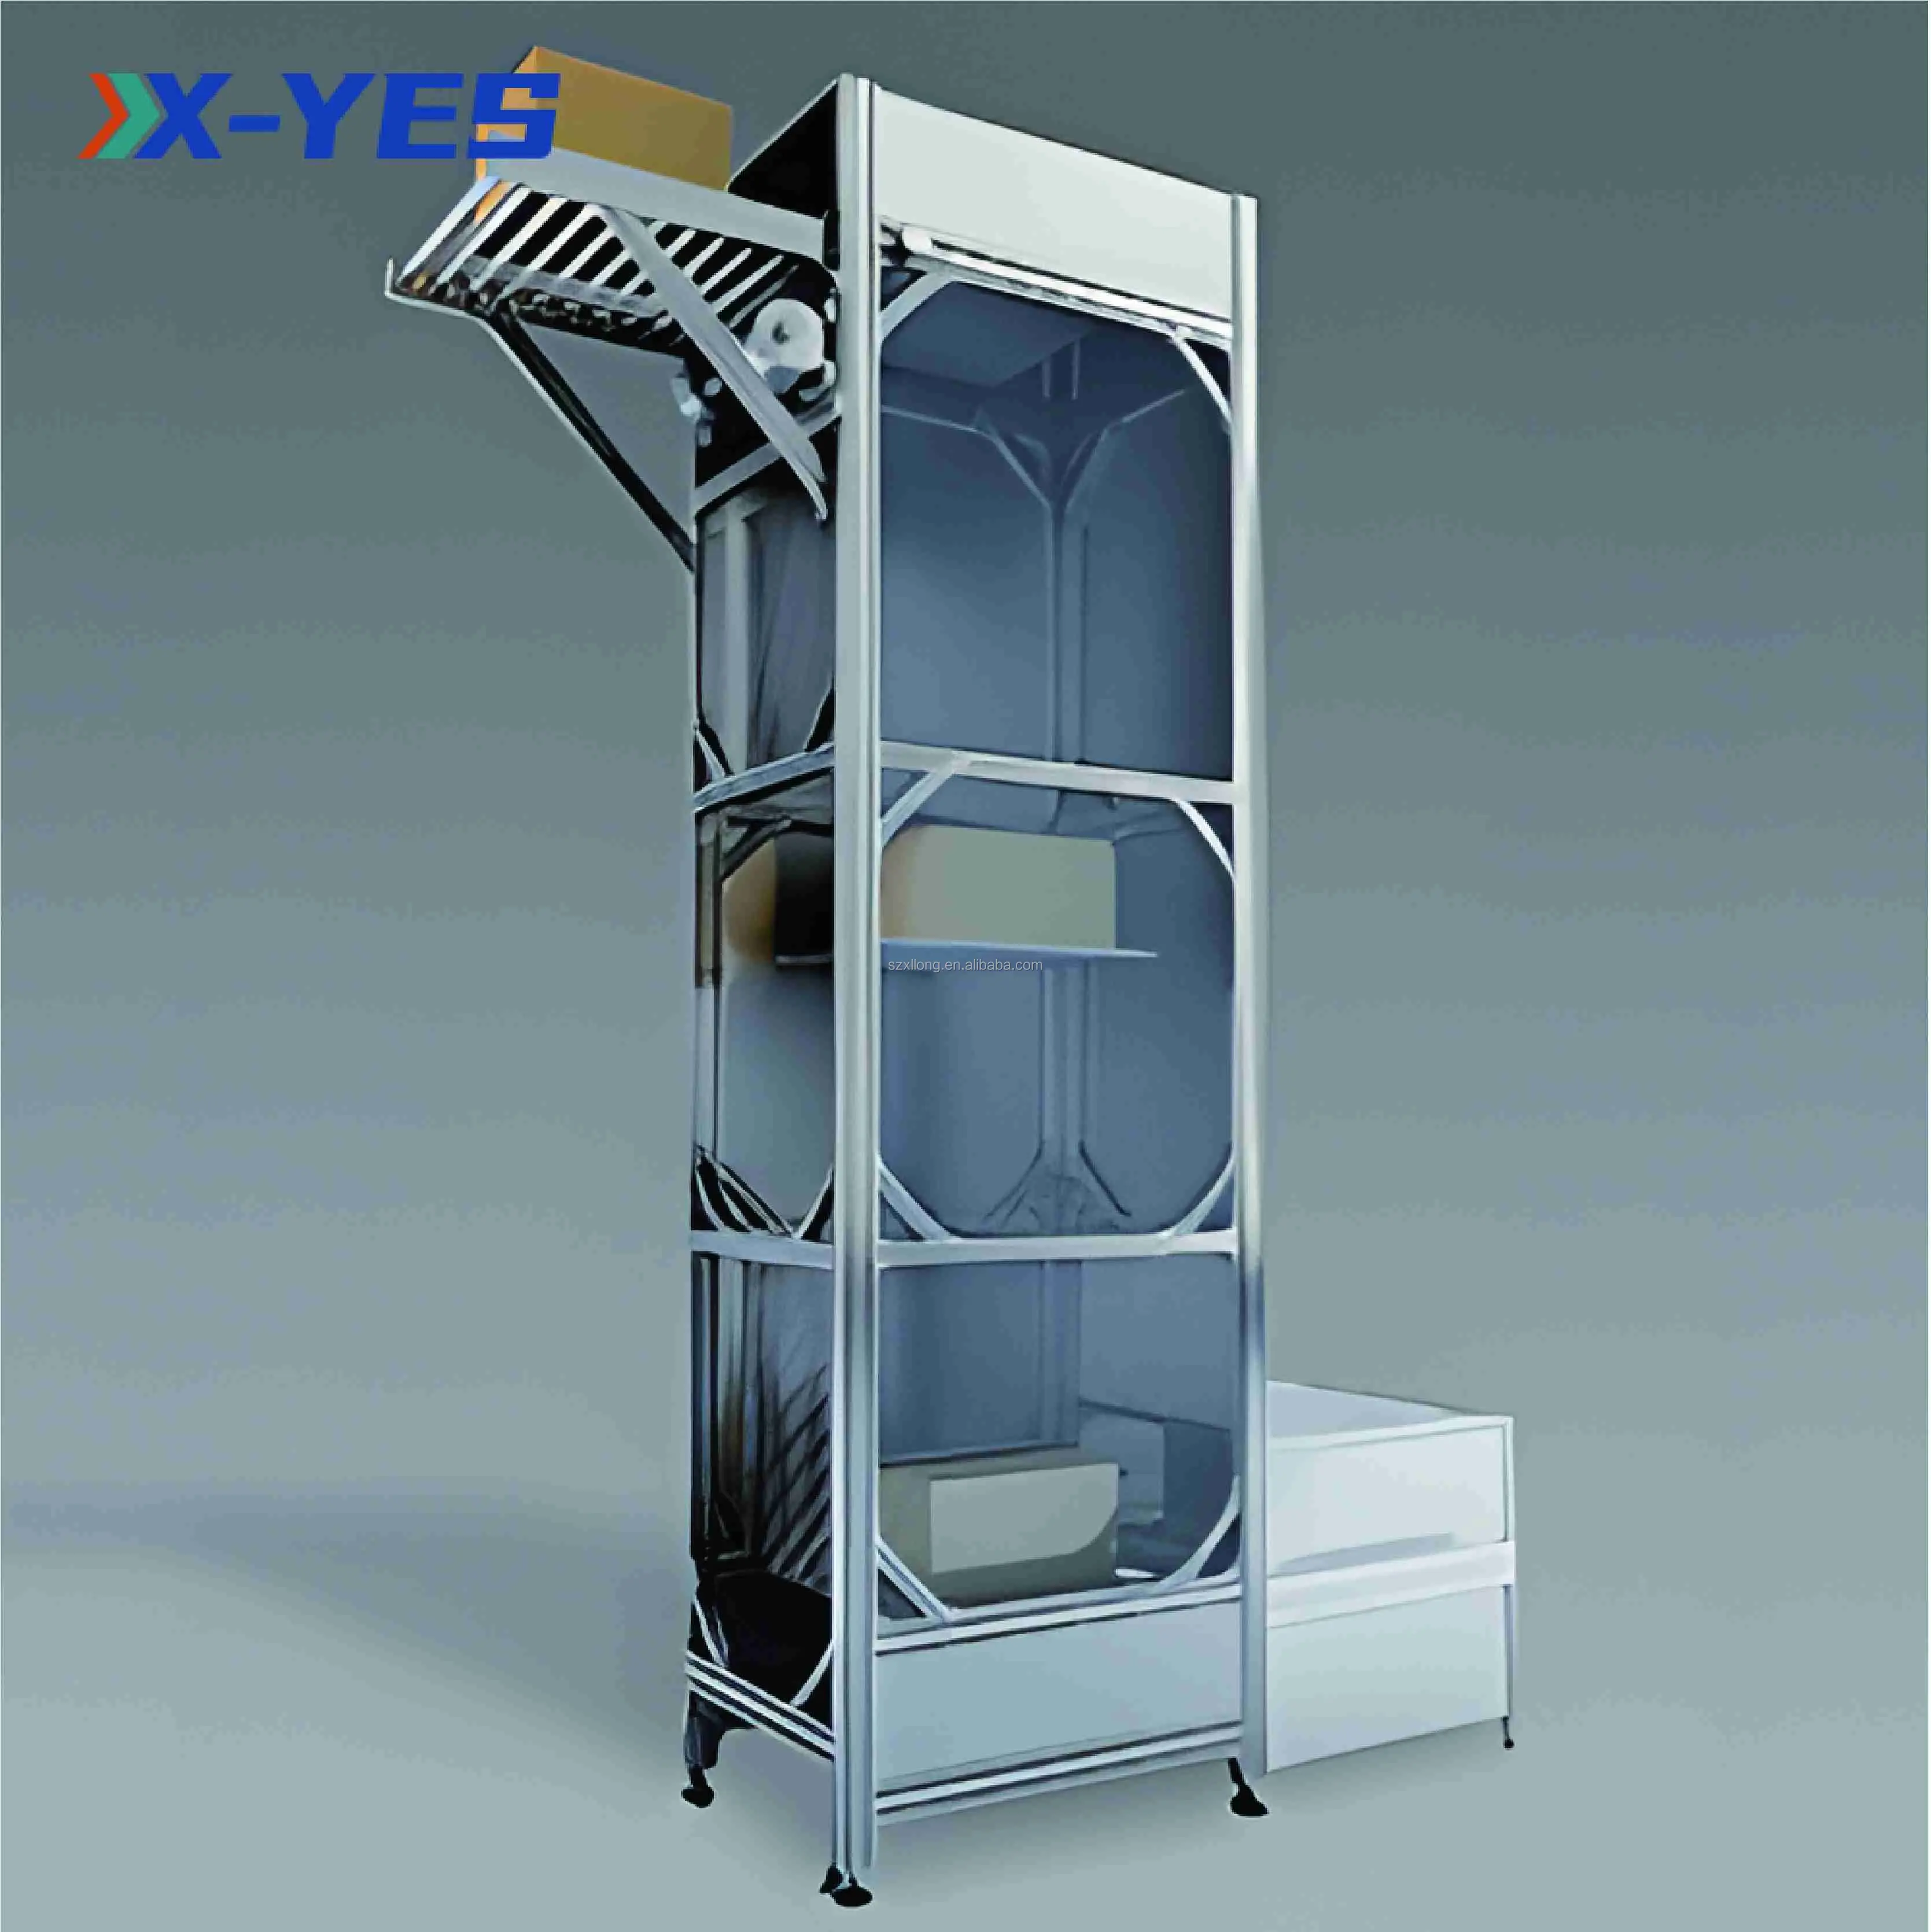 X-YES High Efficiency Products Vertical Mezzanine Goods Lifting Conveyor Machine